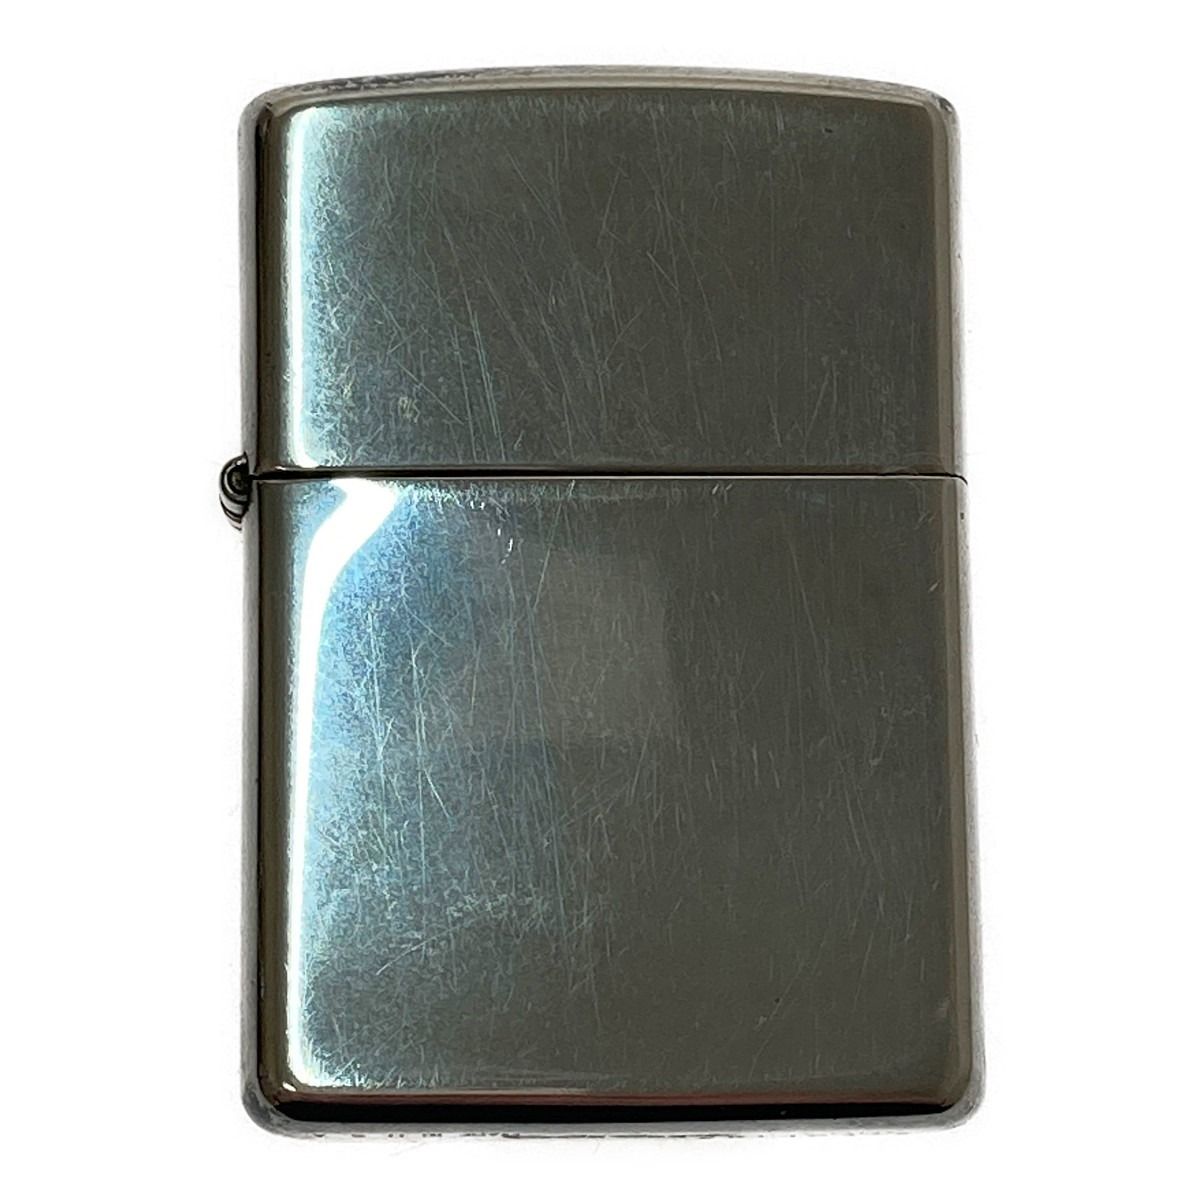 □□ ZIPPO STERLING SILVER 2002 - なんでもリサイクルビッグバンSHOP ...